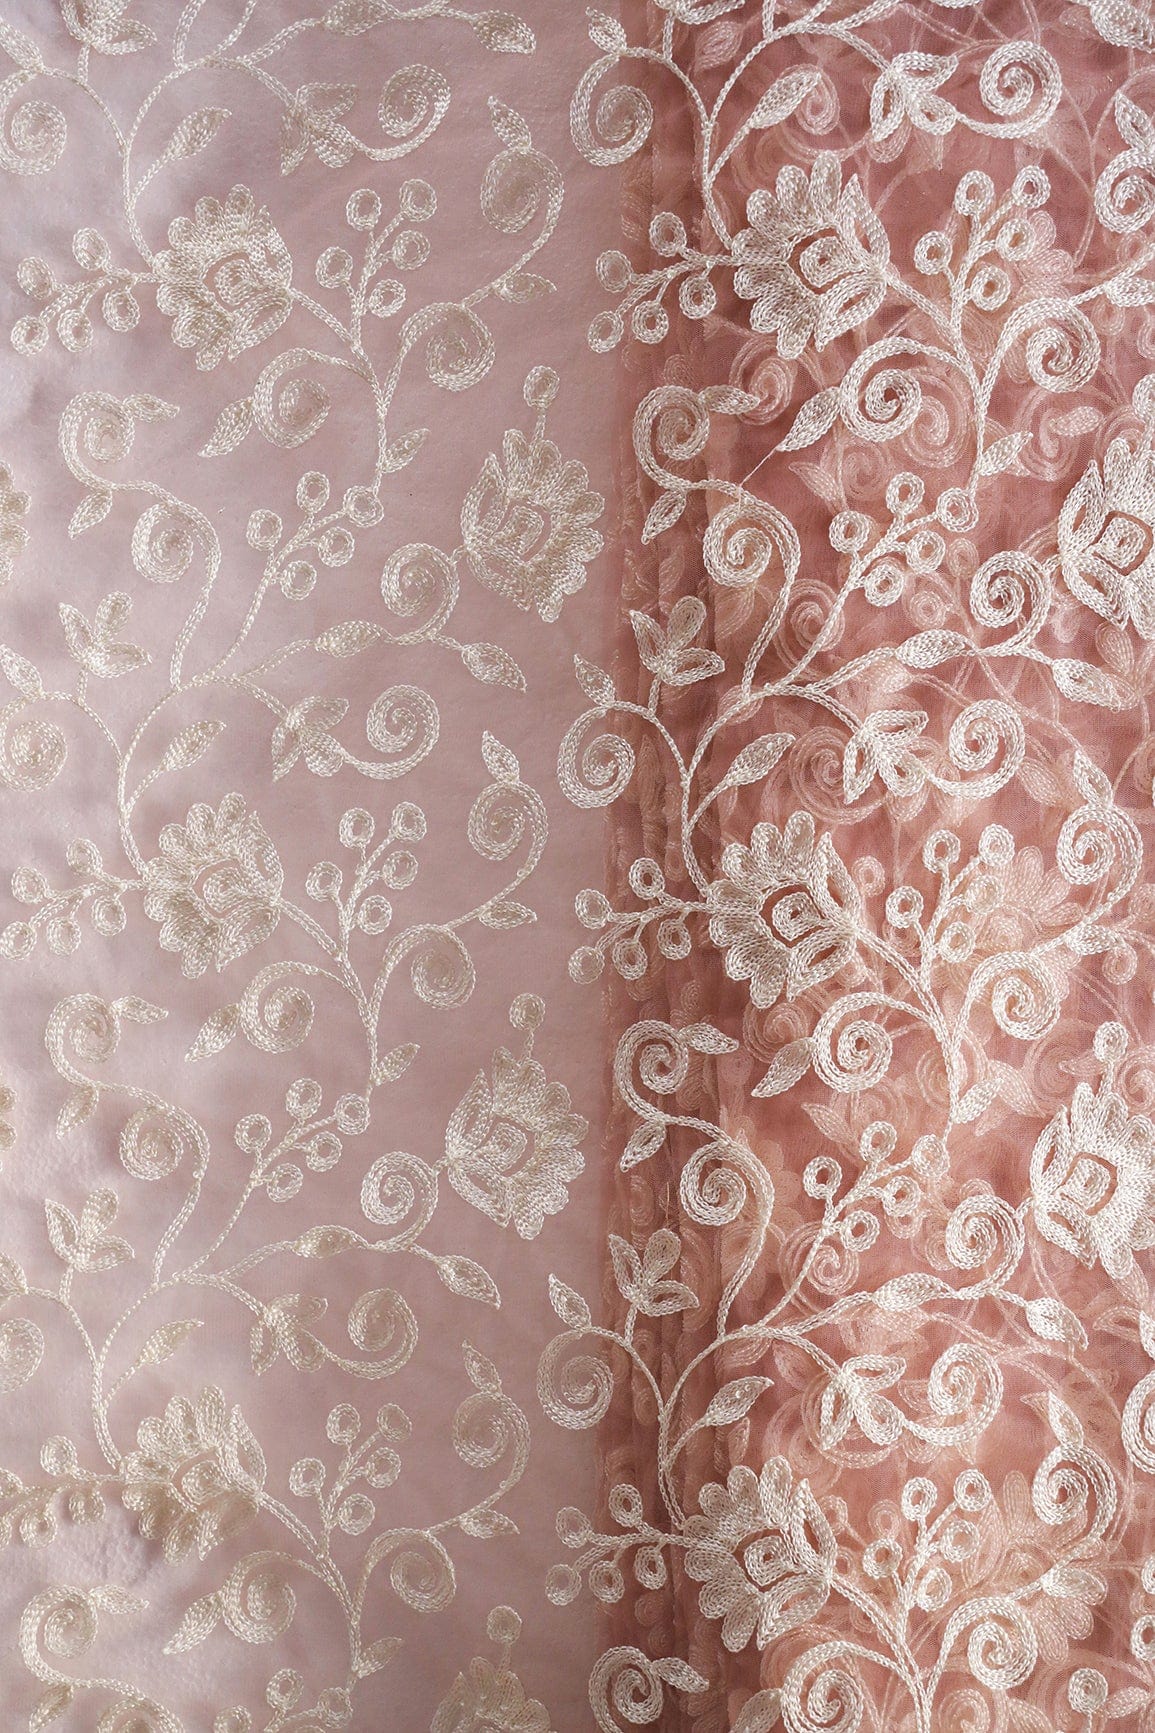 doeraa Embroidery Fabrics White Thread Beautiful Heavy Floral Embroidery On Dusty Pink Soft Net Fabric